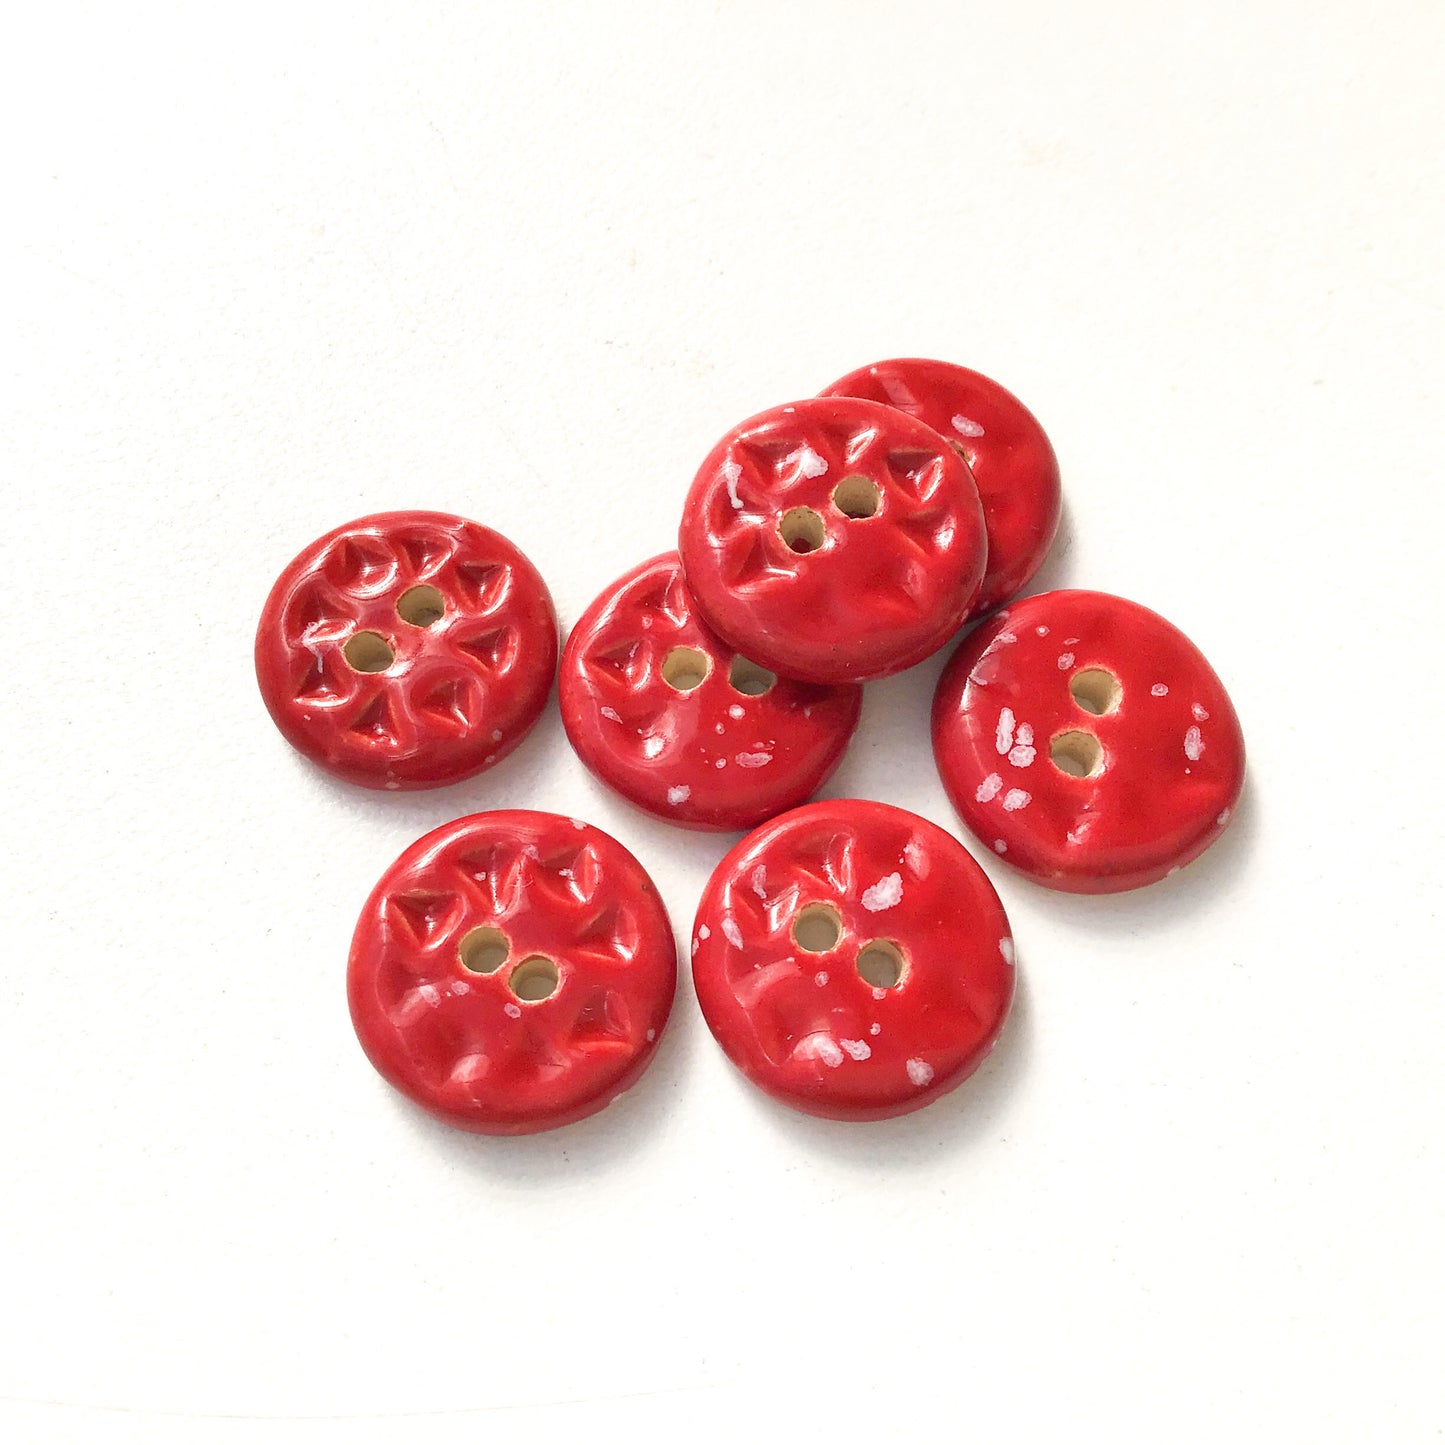 Speckled Red Ceramic Buttons - Small Round Ceramic Buttons - 9/16" -7 Pack